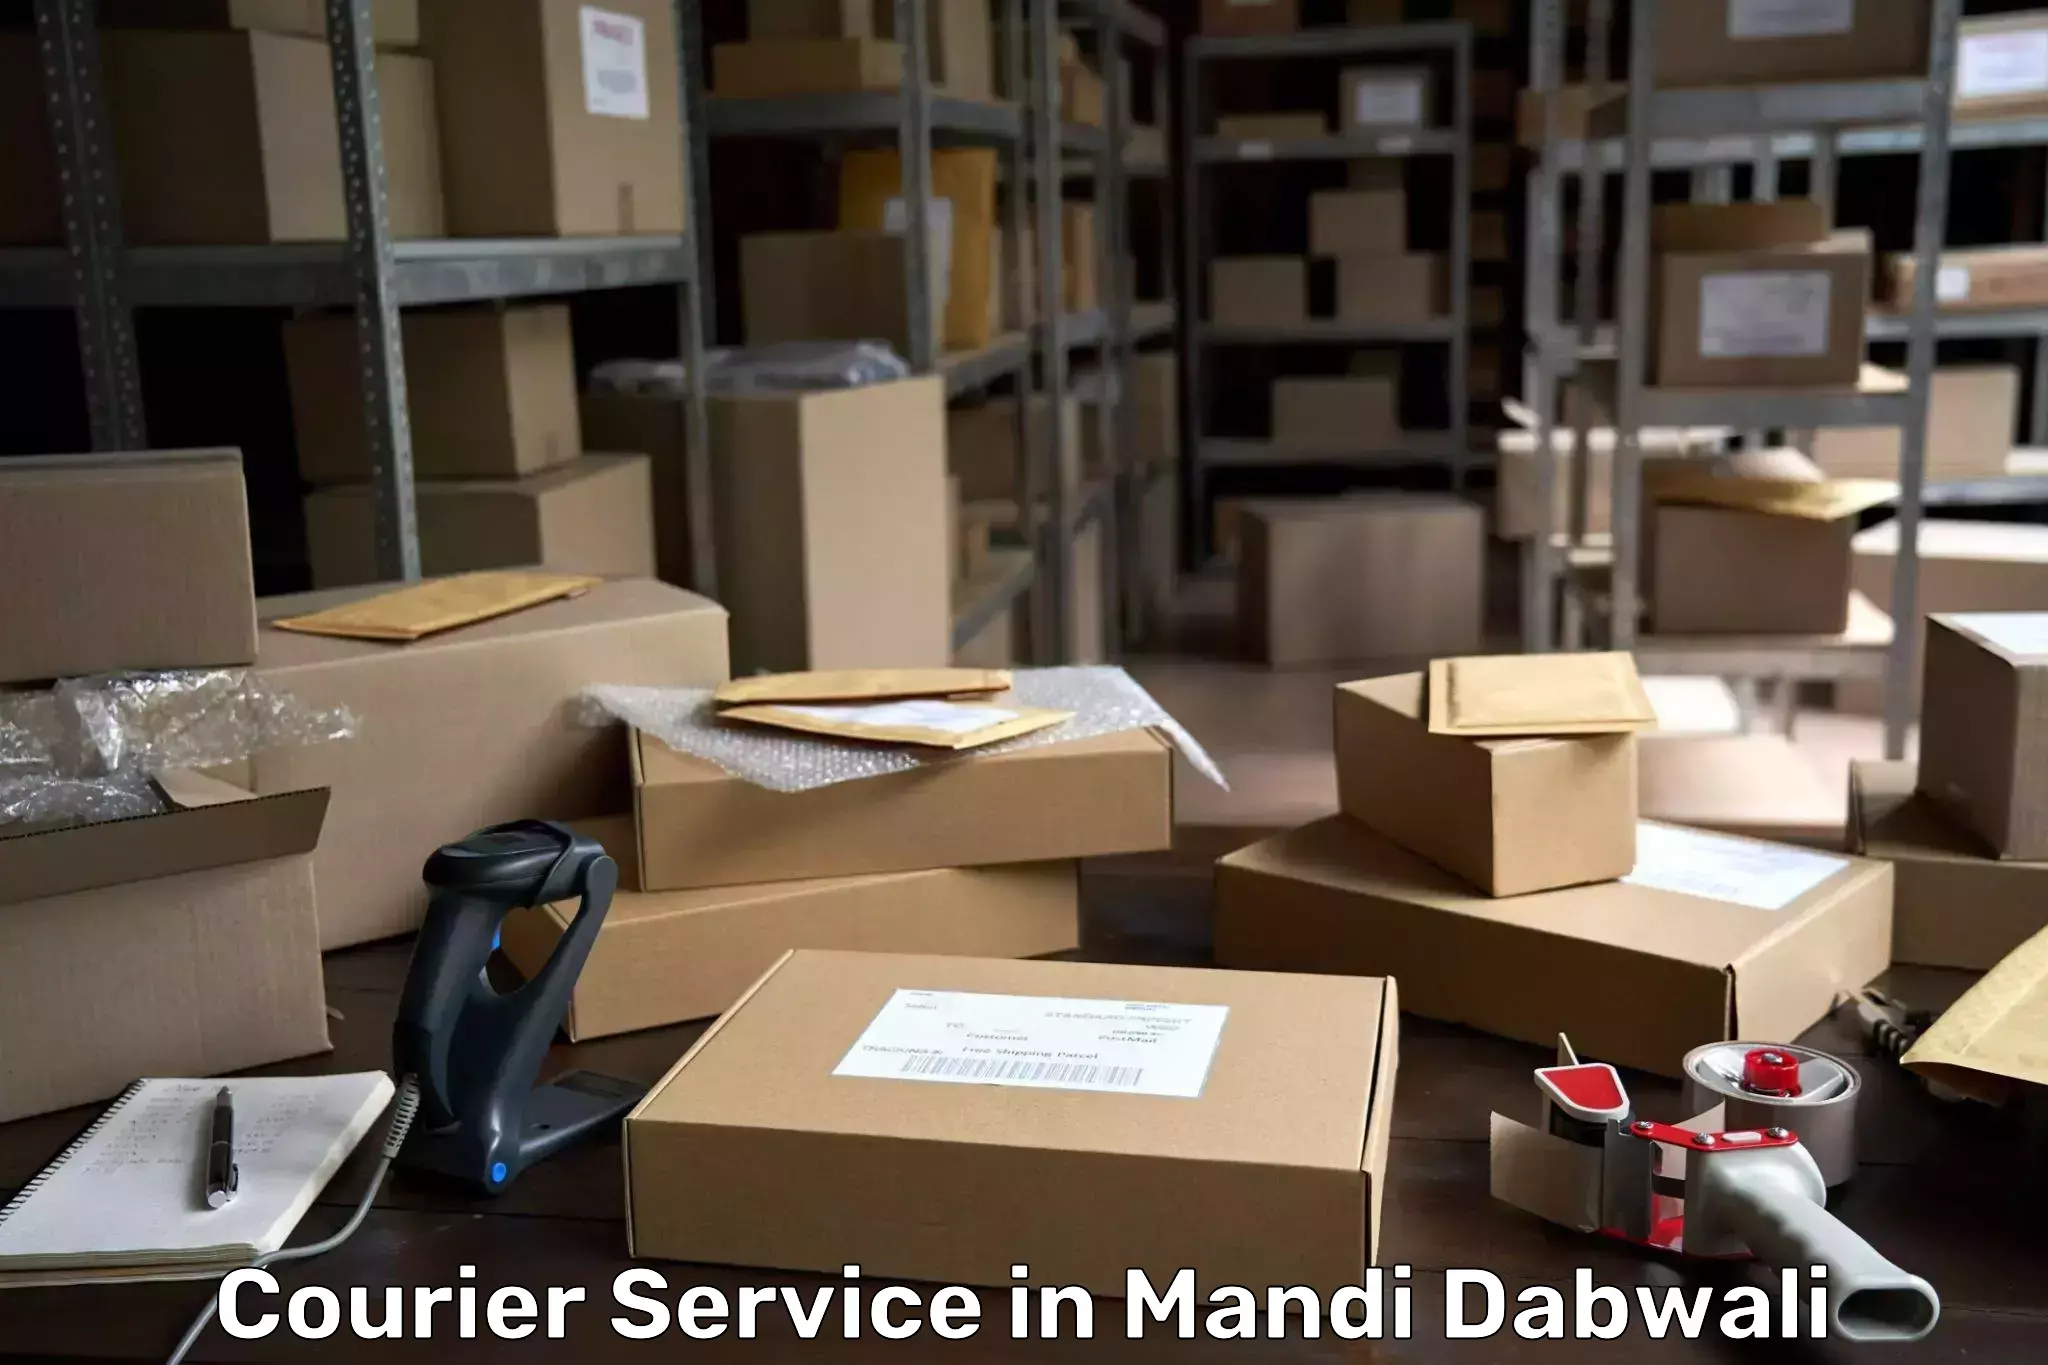 Holiday shipping services in Mandi Dabwali